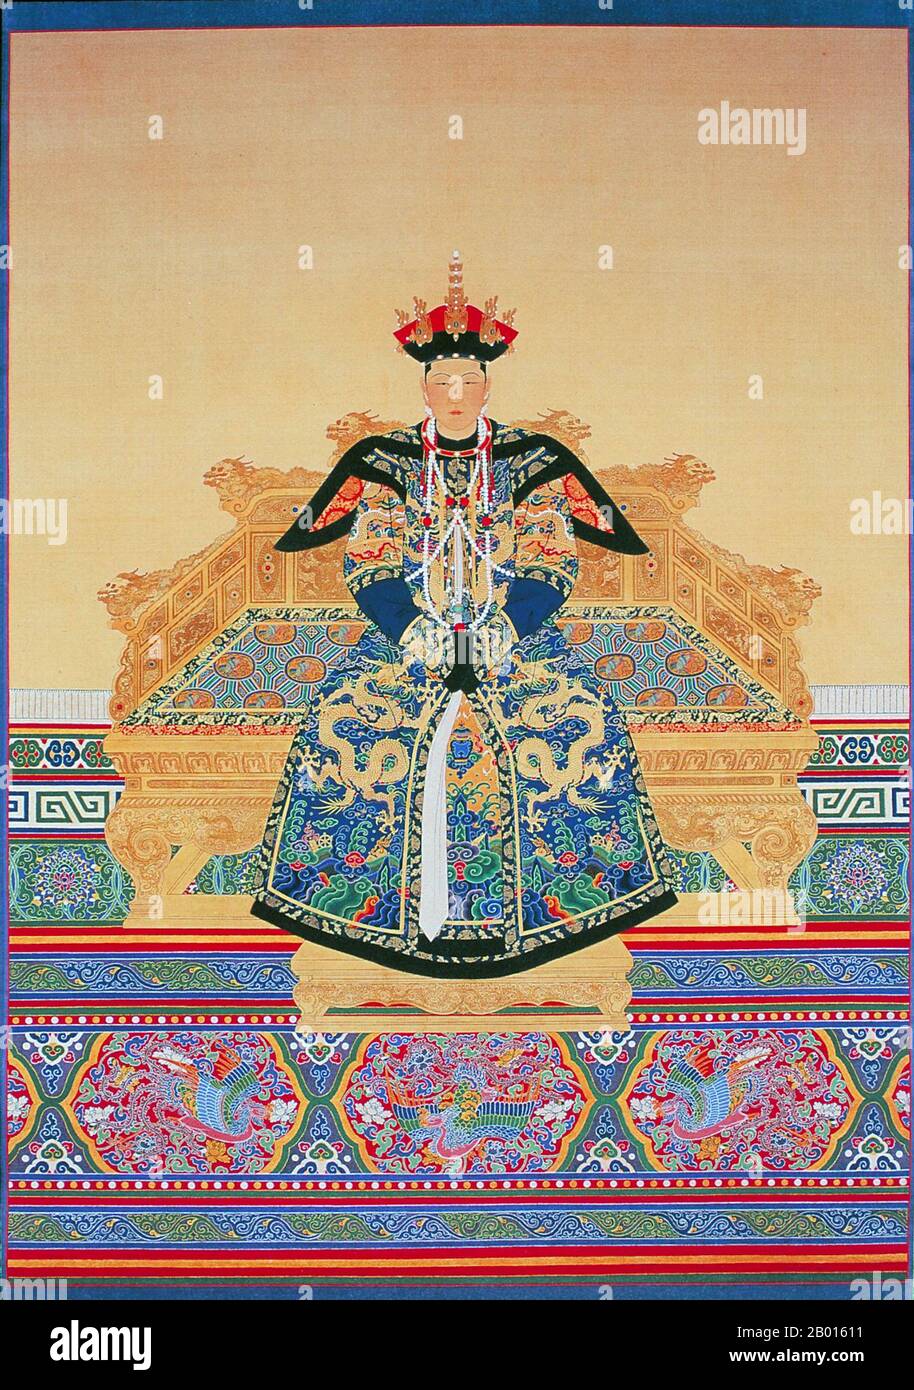 China: Empress Xiao Cheng Ren (26 November 1653 – 16 June 1674), first consort of the Kangxi Emperor. Hanging scroll painting, 17th century.  Empress Xiaochengren, also known as the Ren Xiao, was the first Empress Consort of the Kangxi Emperor of the Qing Dynasty. She came from the Manchu Heseri clan, and therefore was known as 'Empress Heseri'. She married the emperor in 1665, who was very fond of her. In 1669, Heseri gave birth to a son, who died prematurely. In 1674, Heseri died at the age of 20 while giving birth to Prince Yin Reng, who became the crown prince of the Kangxi Emperor. Stock Photo